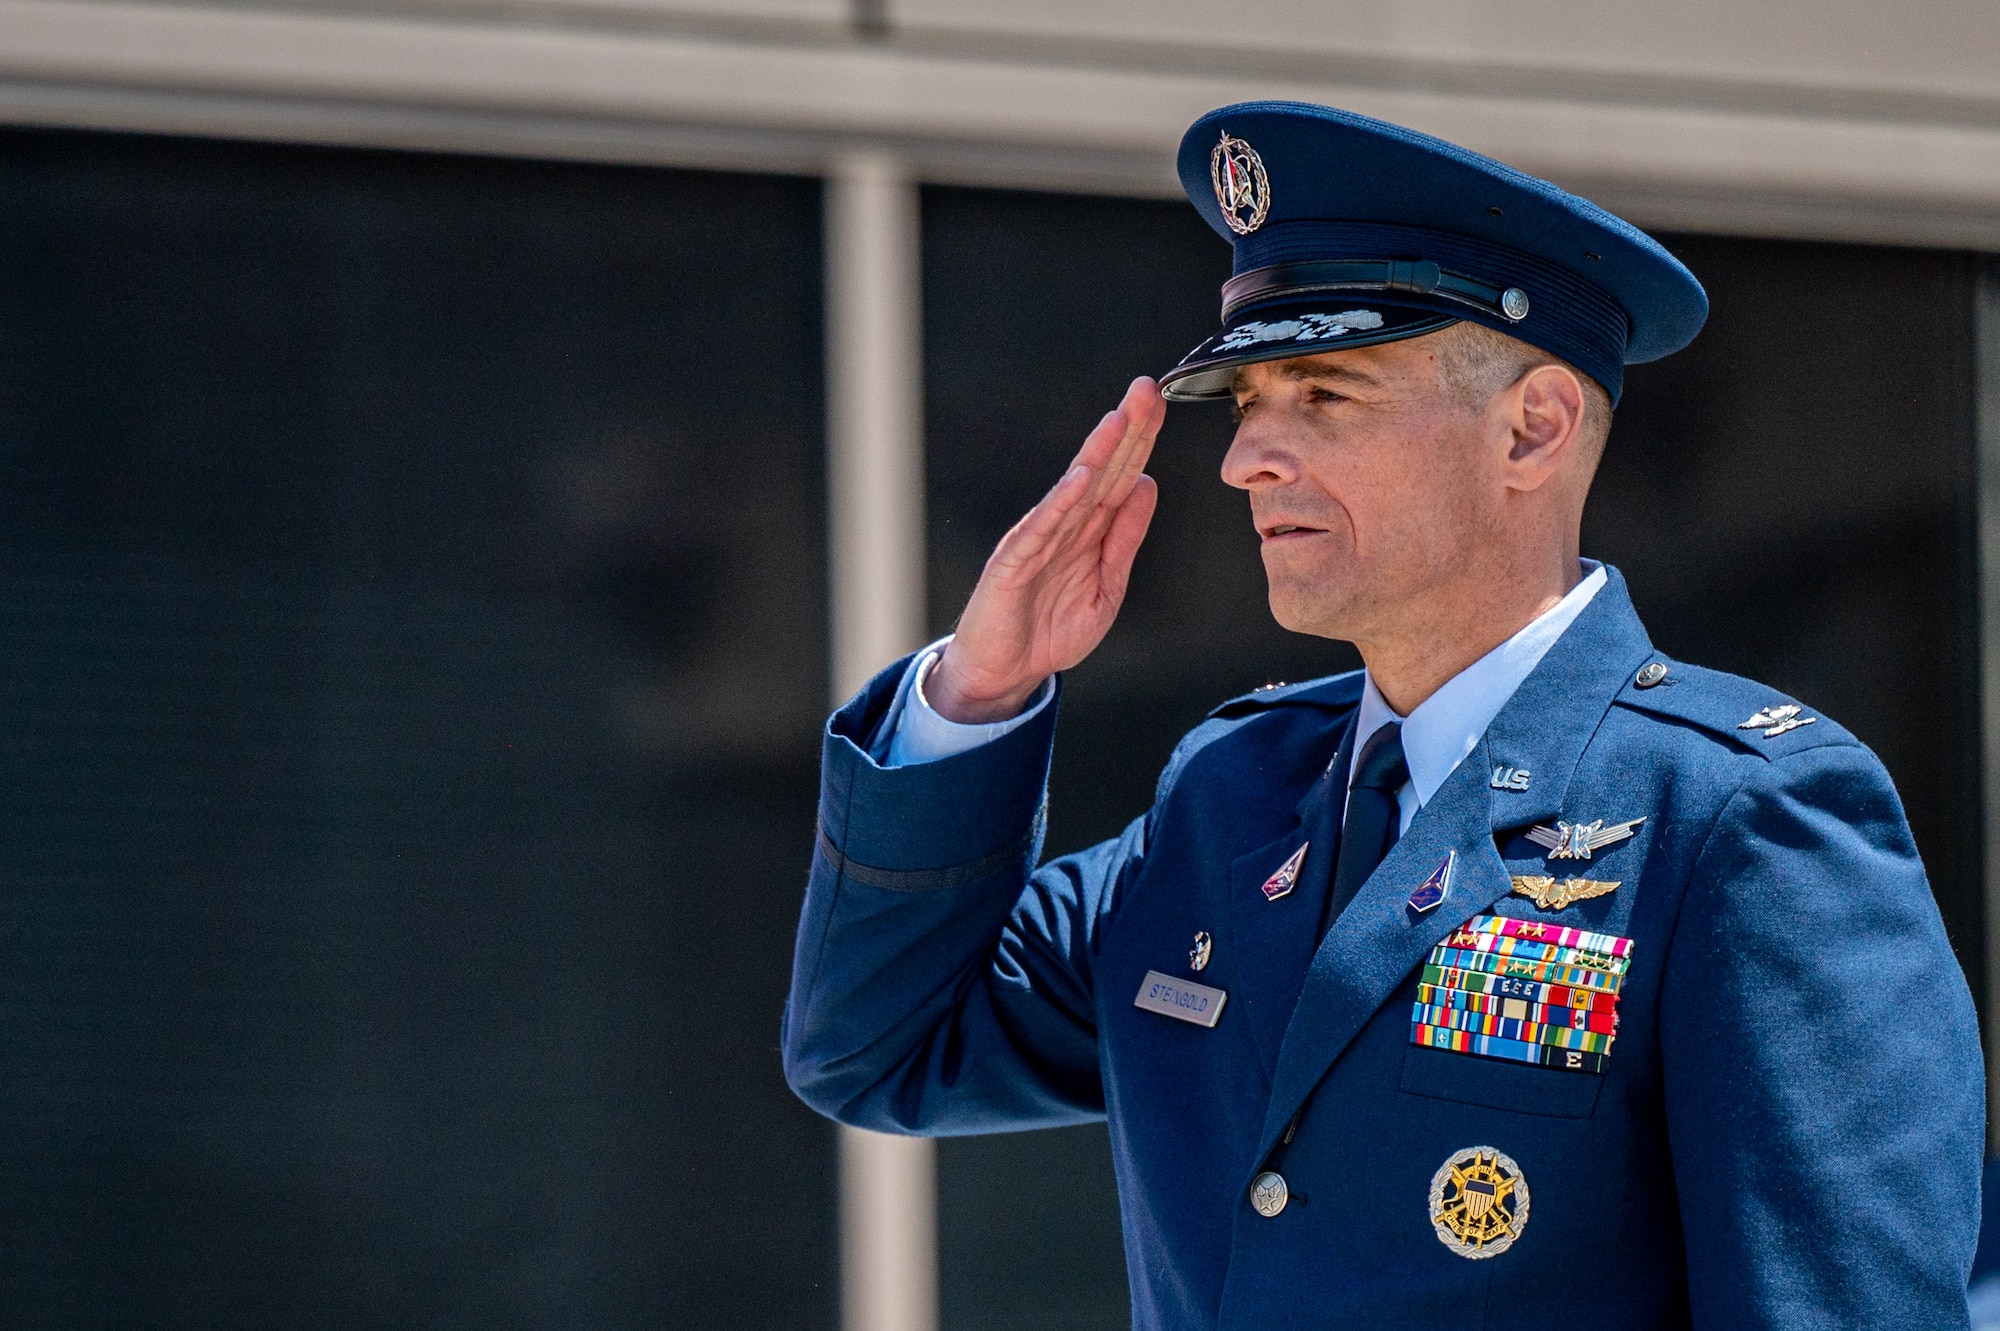 U.S. Space Force Col. Jay Steingold, the Delta 11 incoming commander, renders his first salute to members of the Delta during a change of command ceremony at Schriever Space Force Base, Colorado, July 7, 2023. Delta 11 is responsible for delivering realistic, threat-informed test and training resources to U.S. Space Force, joint, and coalition space operators via live, virtual, and constructive threat replication, leveraging the National Space Test and Training Complex across multiple space warfighting disciplines. (U.S. Space Force photo by Ethan Johnson)